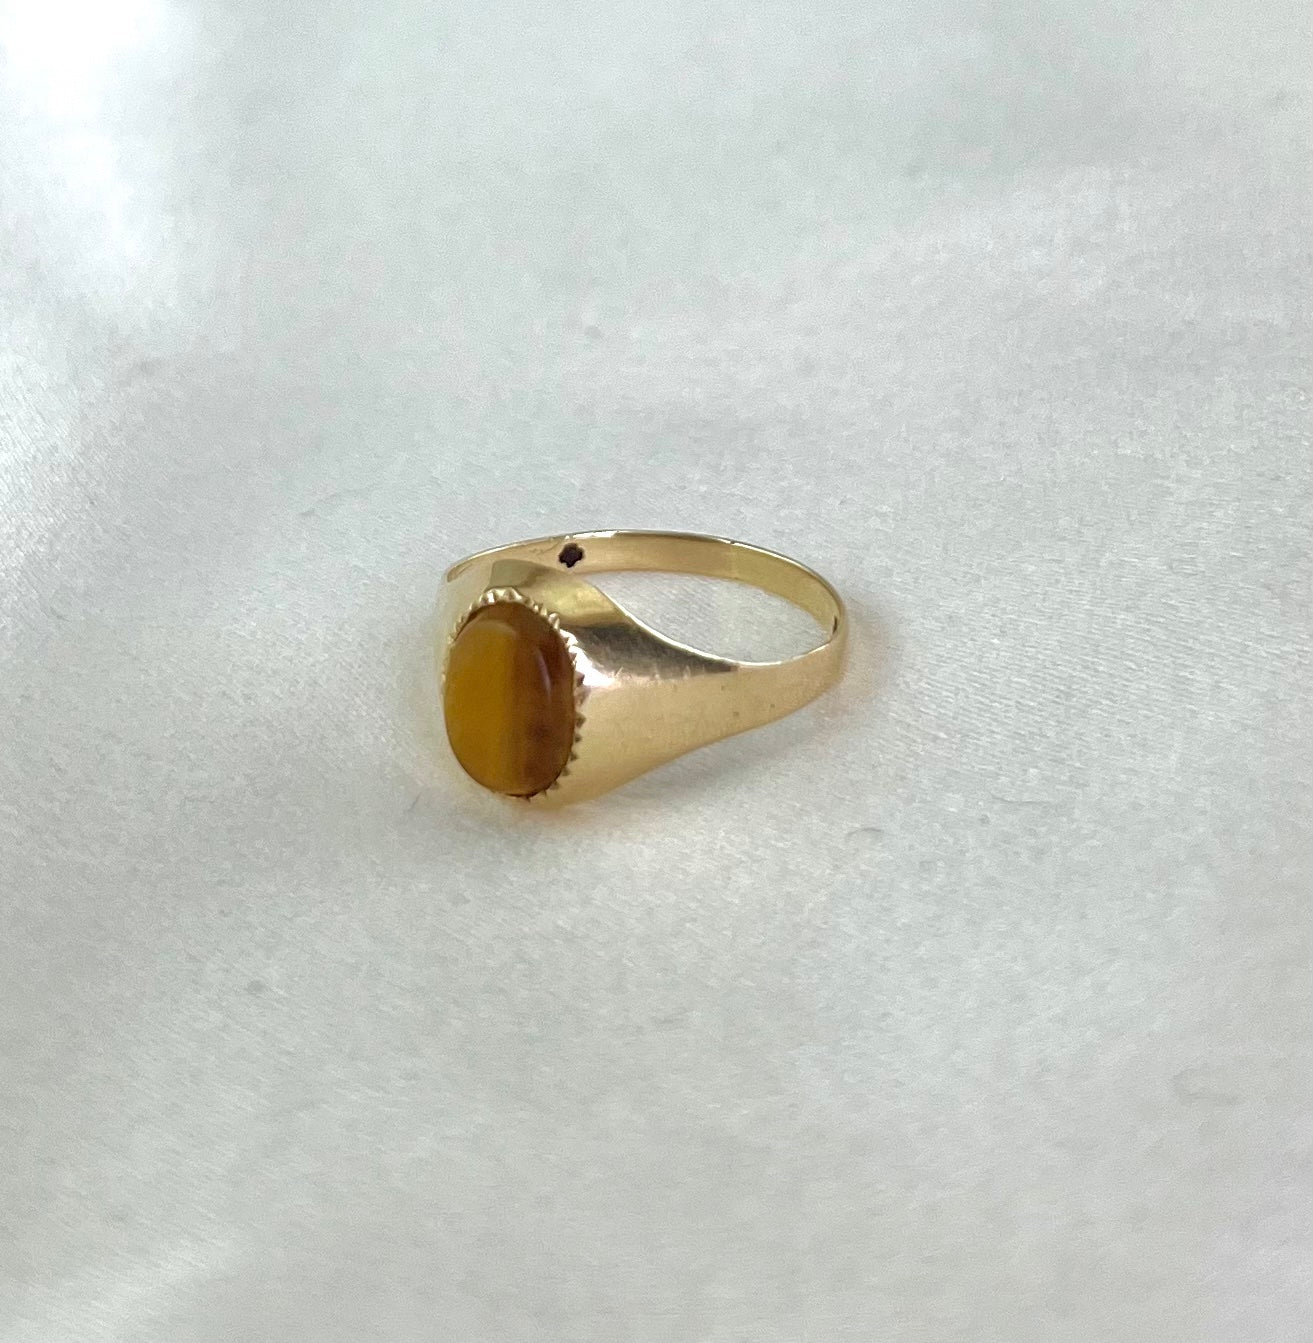 Vintage 9ct Yellow Gold Tigers Eye Ring, Size L UK 1970s